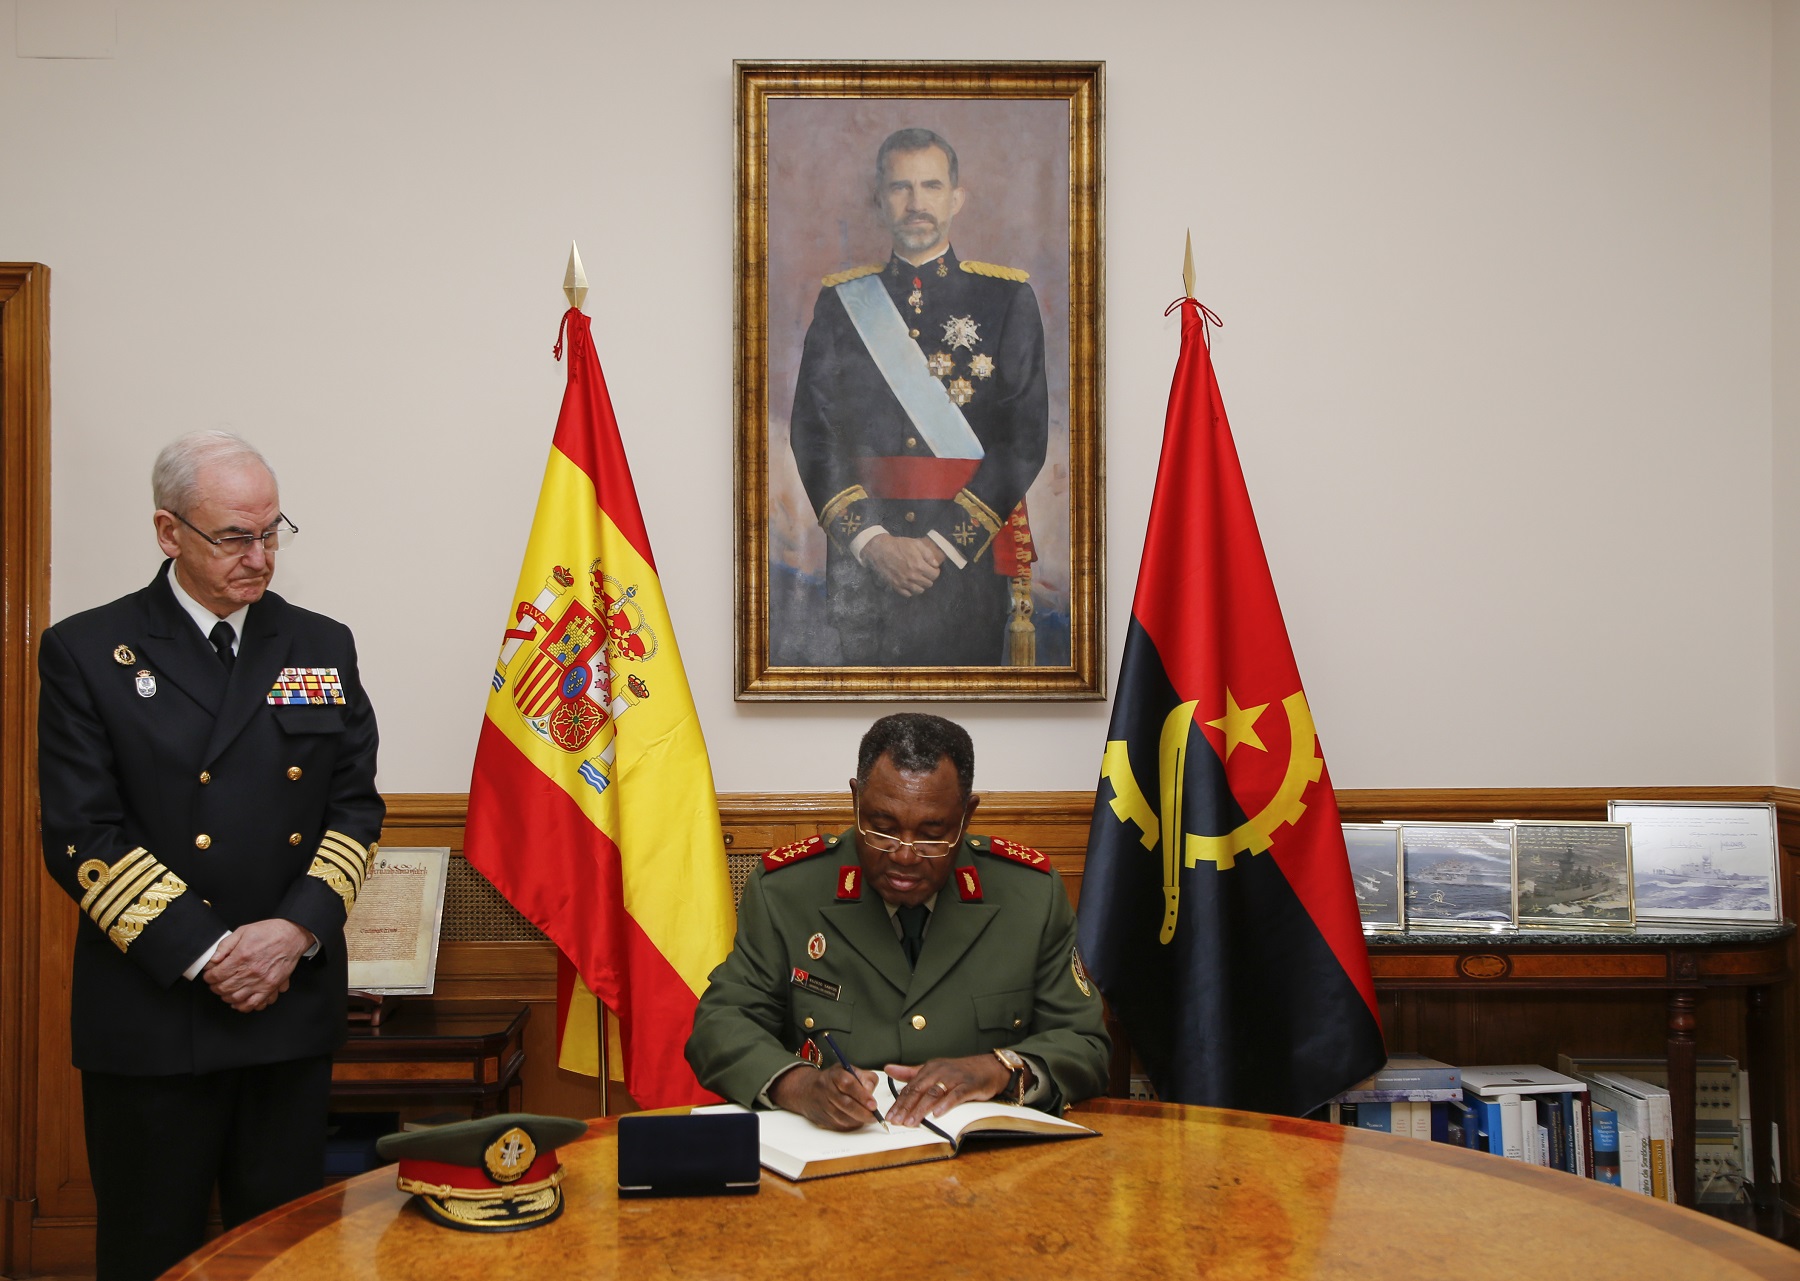 Signing the Book of Honour